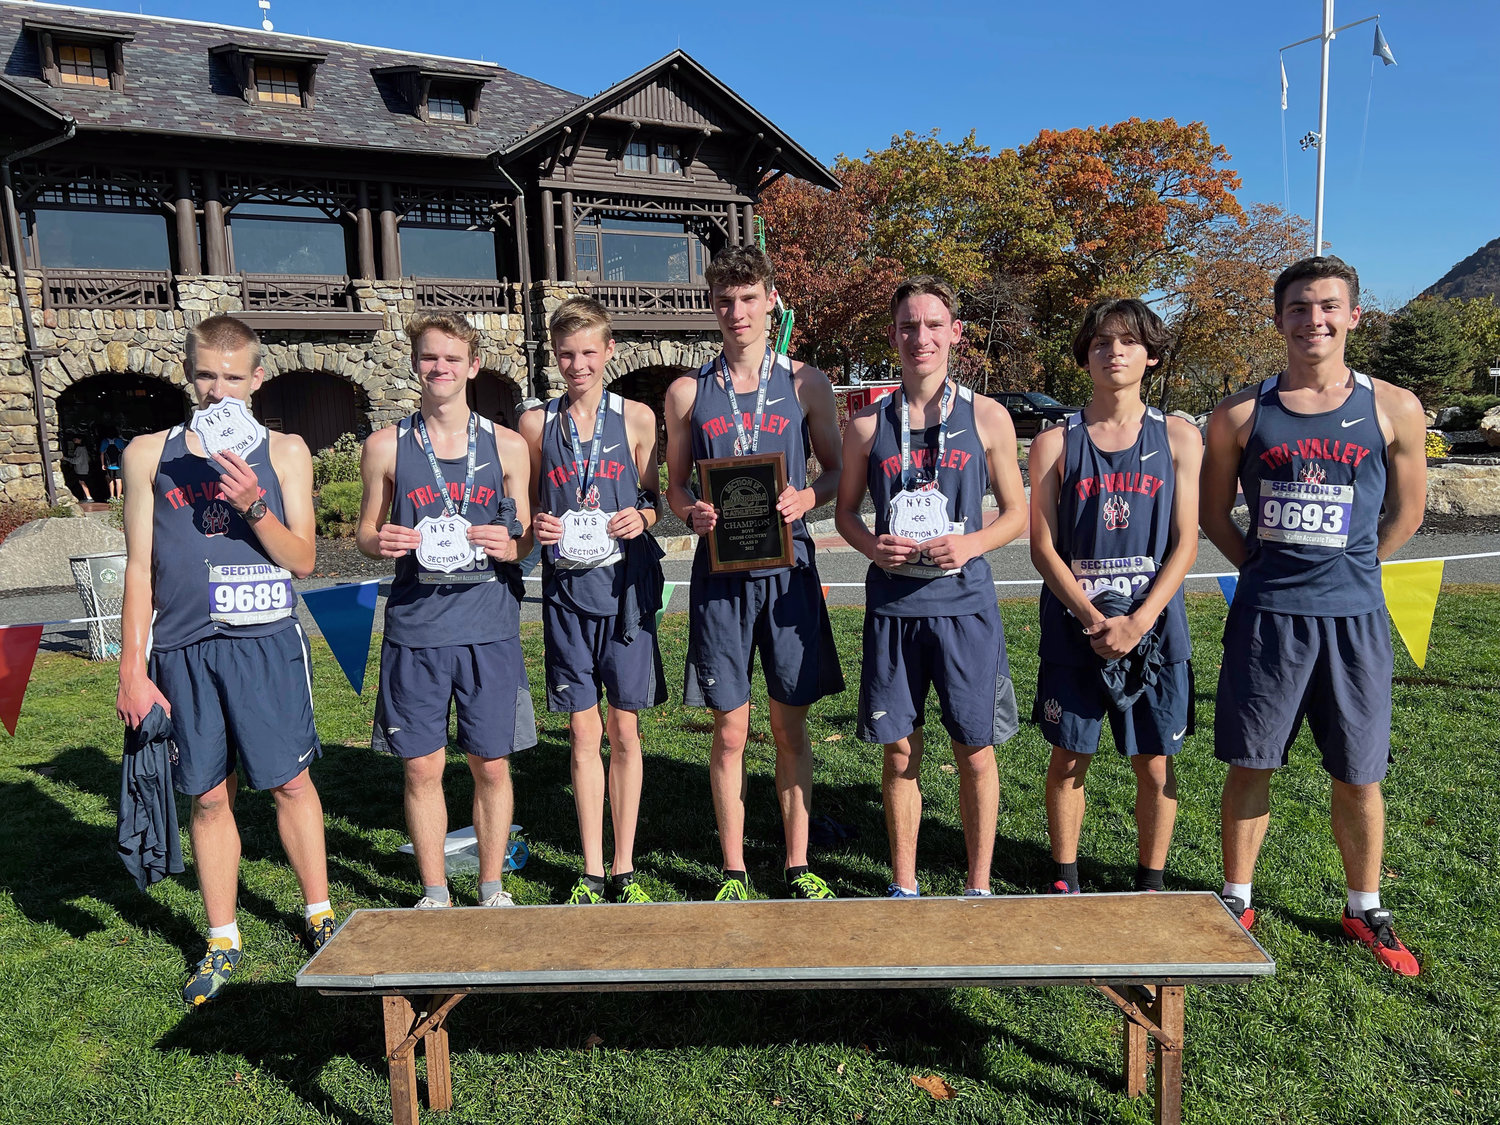 Section IX Class D Champions (left to right) Thomas Houghtaling, Craig Costa, Van Furman, Adam Furman, Vincent Mingo, Dayne Wall and Connor Weyant.